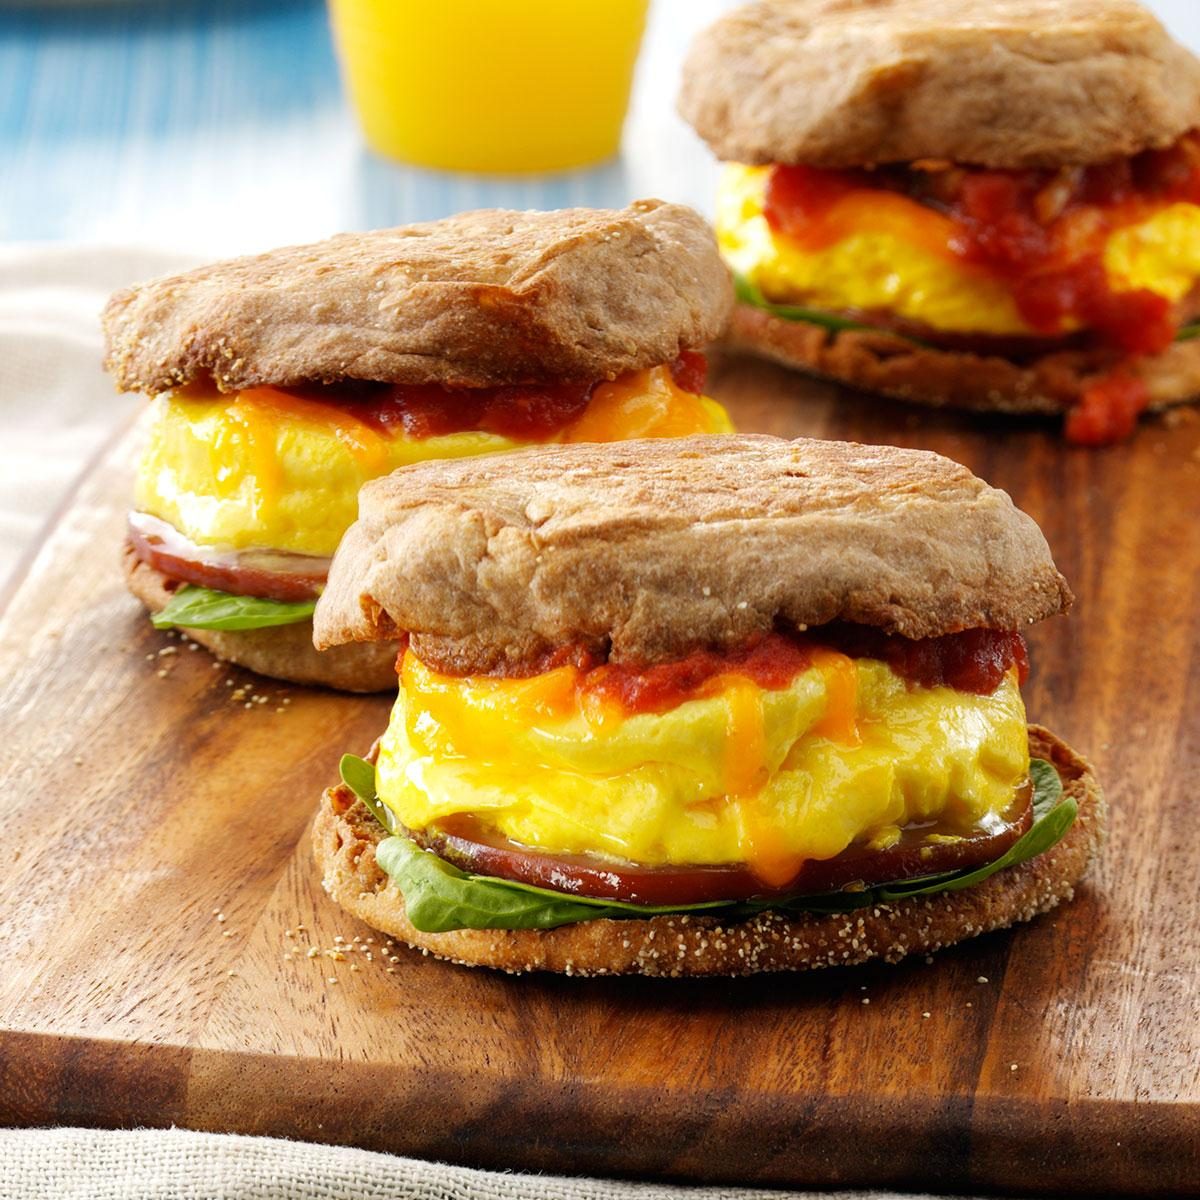 <p>If you're looking for a grab-and-go breakfast for busy days, this high-protein sandwich is low in fat and keeps me full all morning. Plus, it's only about 200 calories! —Brenda Otto, Reedsburg, Wisconsin</p> <div class="listicle-page__buttons"> <div class="listicle-page__cta-button"><a href='https://www.tasteofhome.com/recipes/microwave-egg-sandwich/'>Get Our Recipe: Microwave Egg Sandwich</a></div> </div>